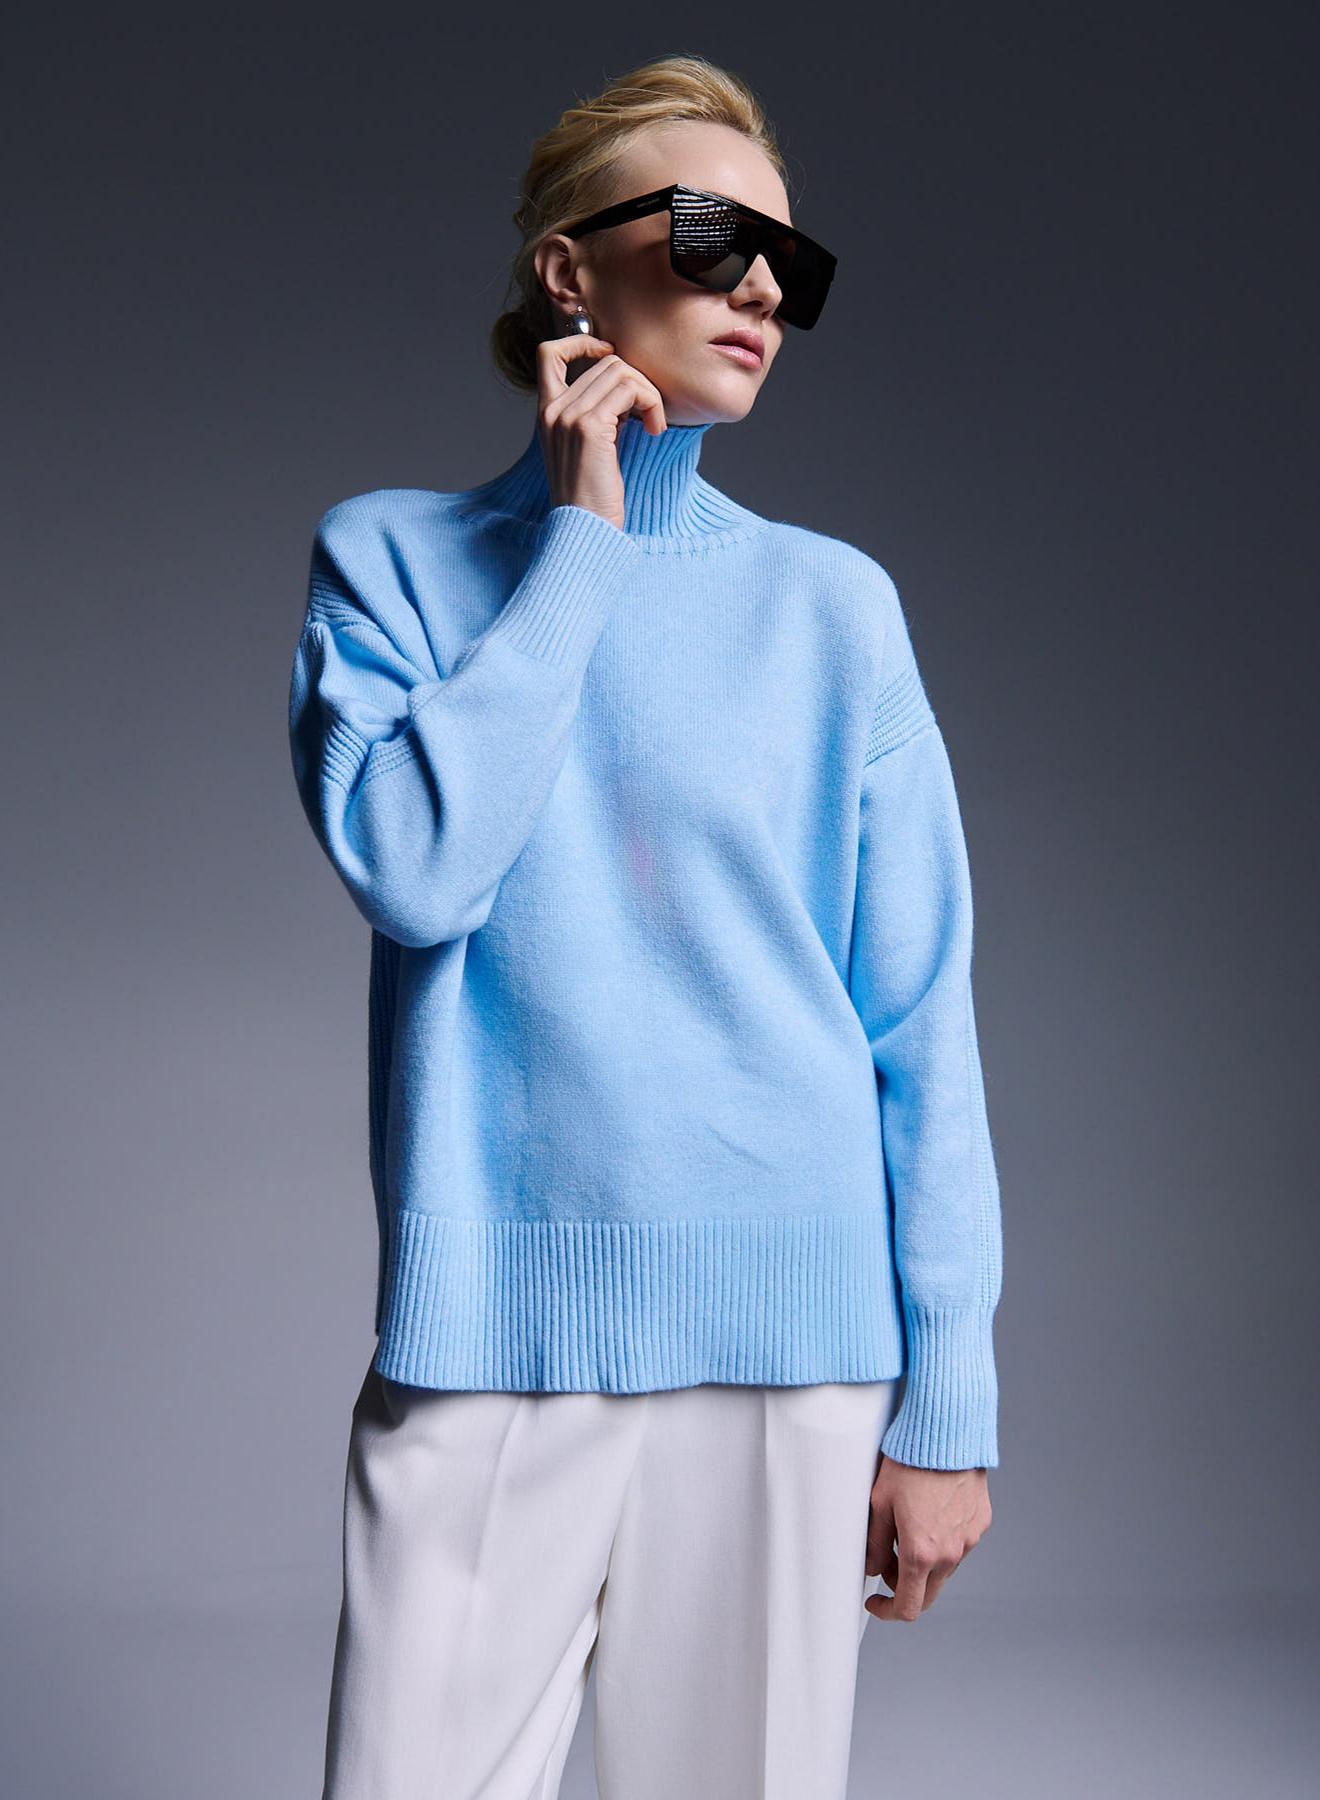 Turtleneck knitted blouse with side slits - 1